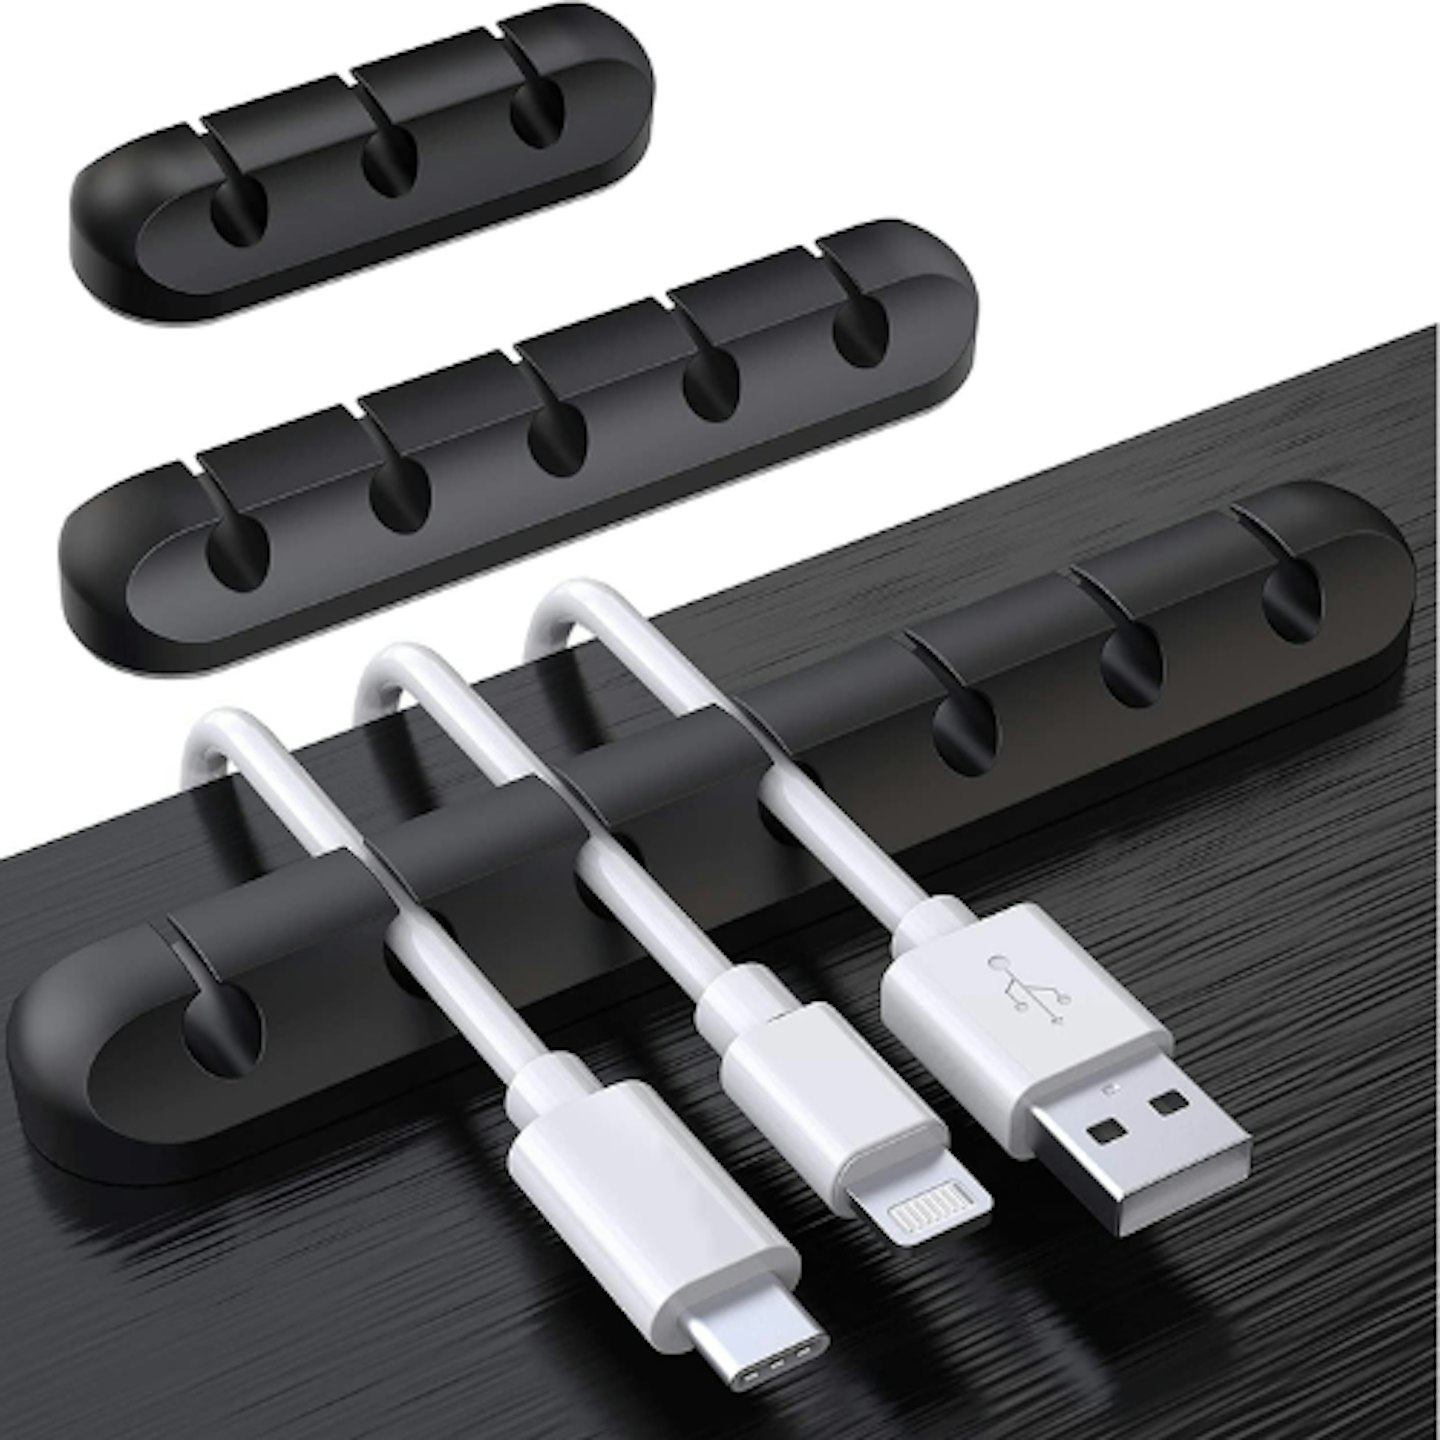 Cable organizers that will de-stress and de-clutter